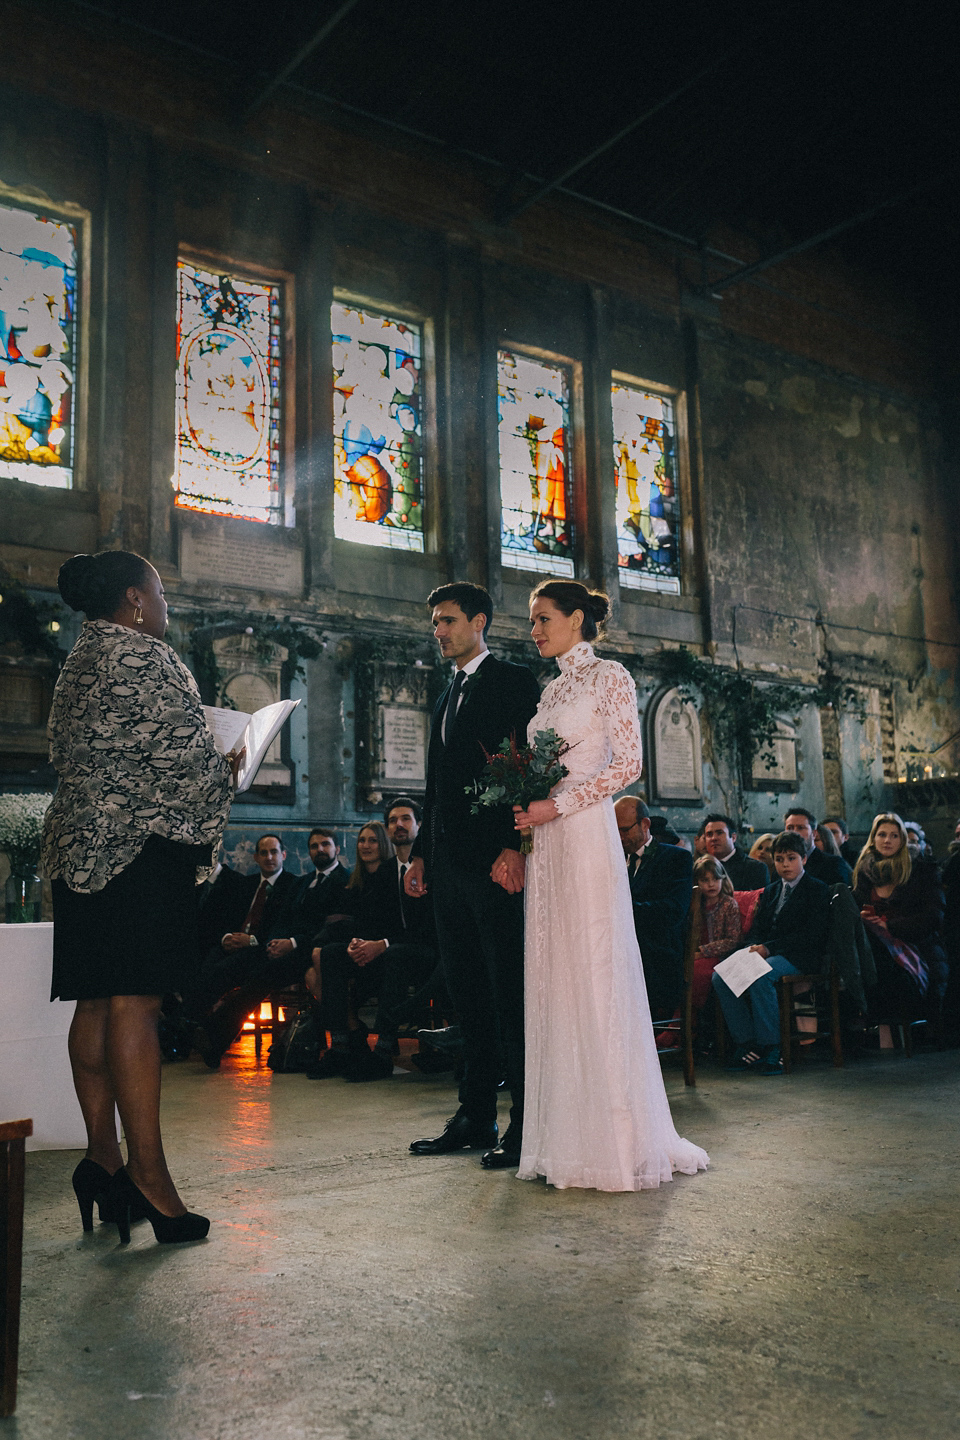 A blue velvet wedding held at The Asylum in Caroline Gardens, Peckham. Photography by Eclection Photography.